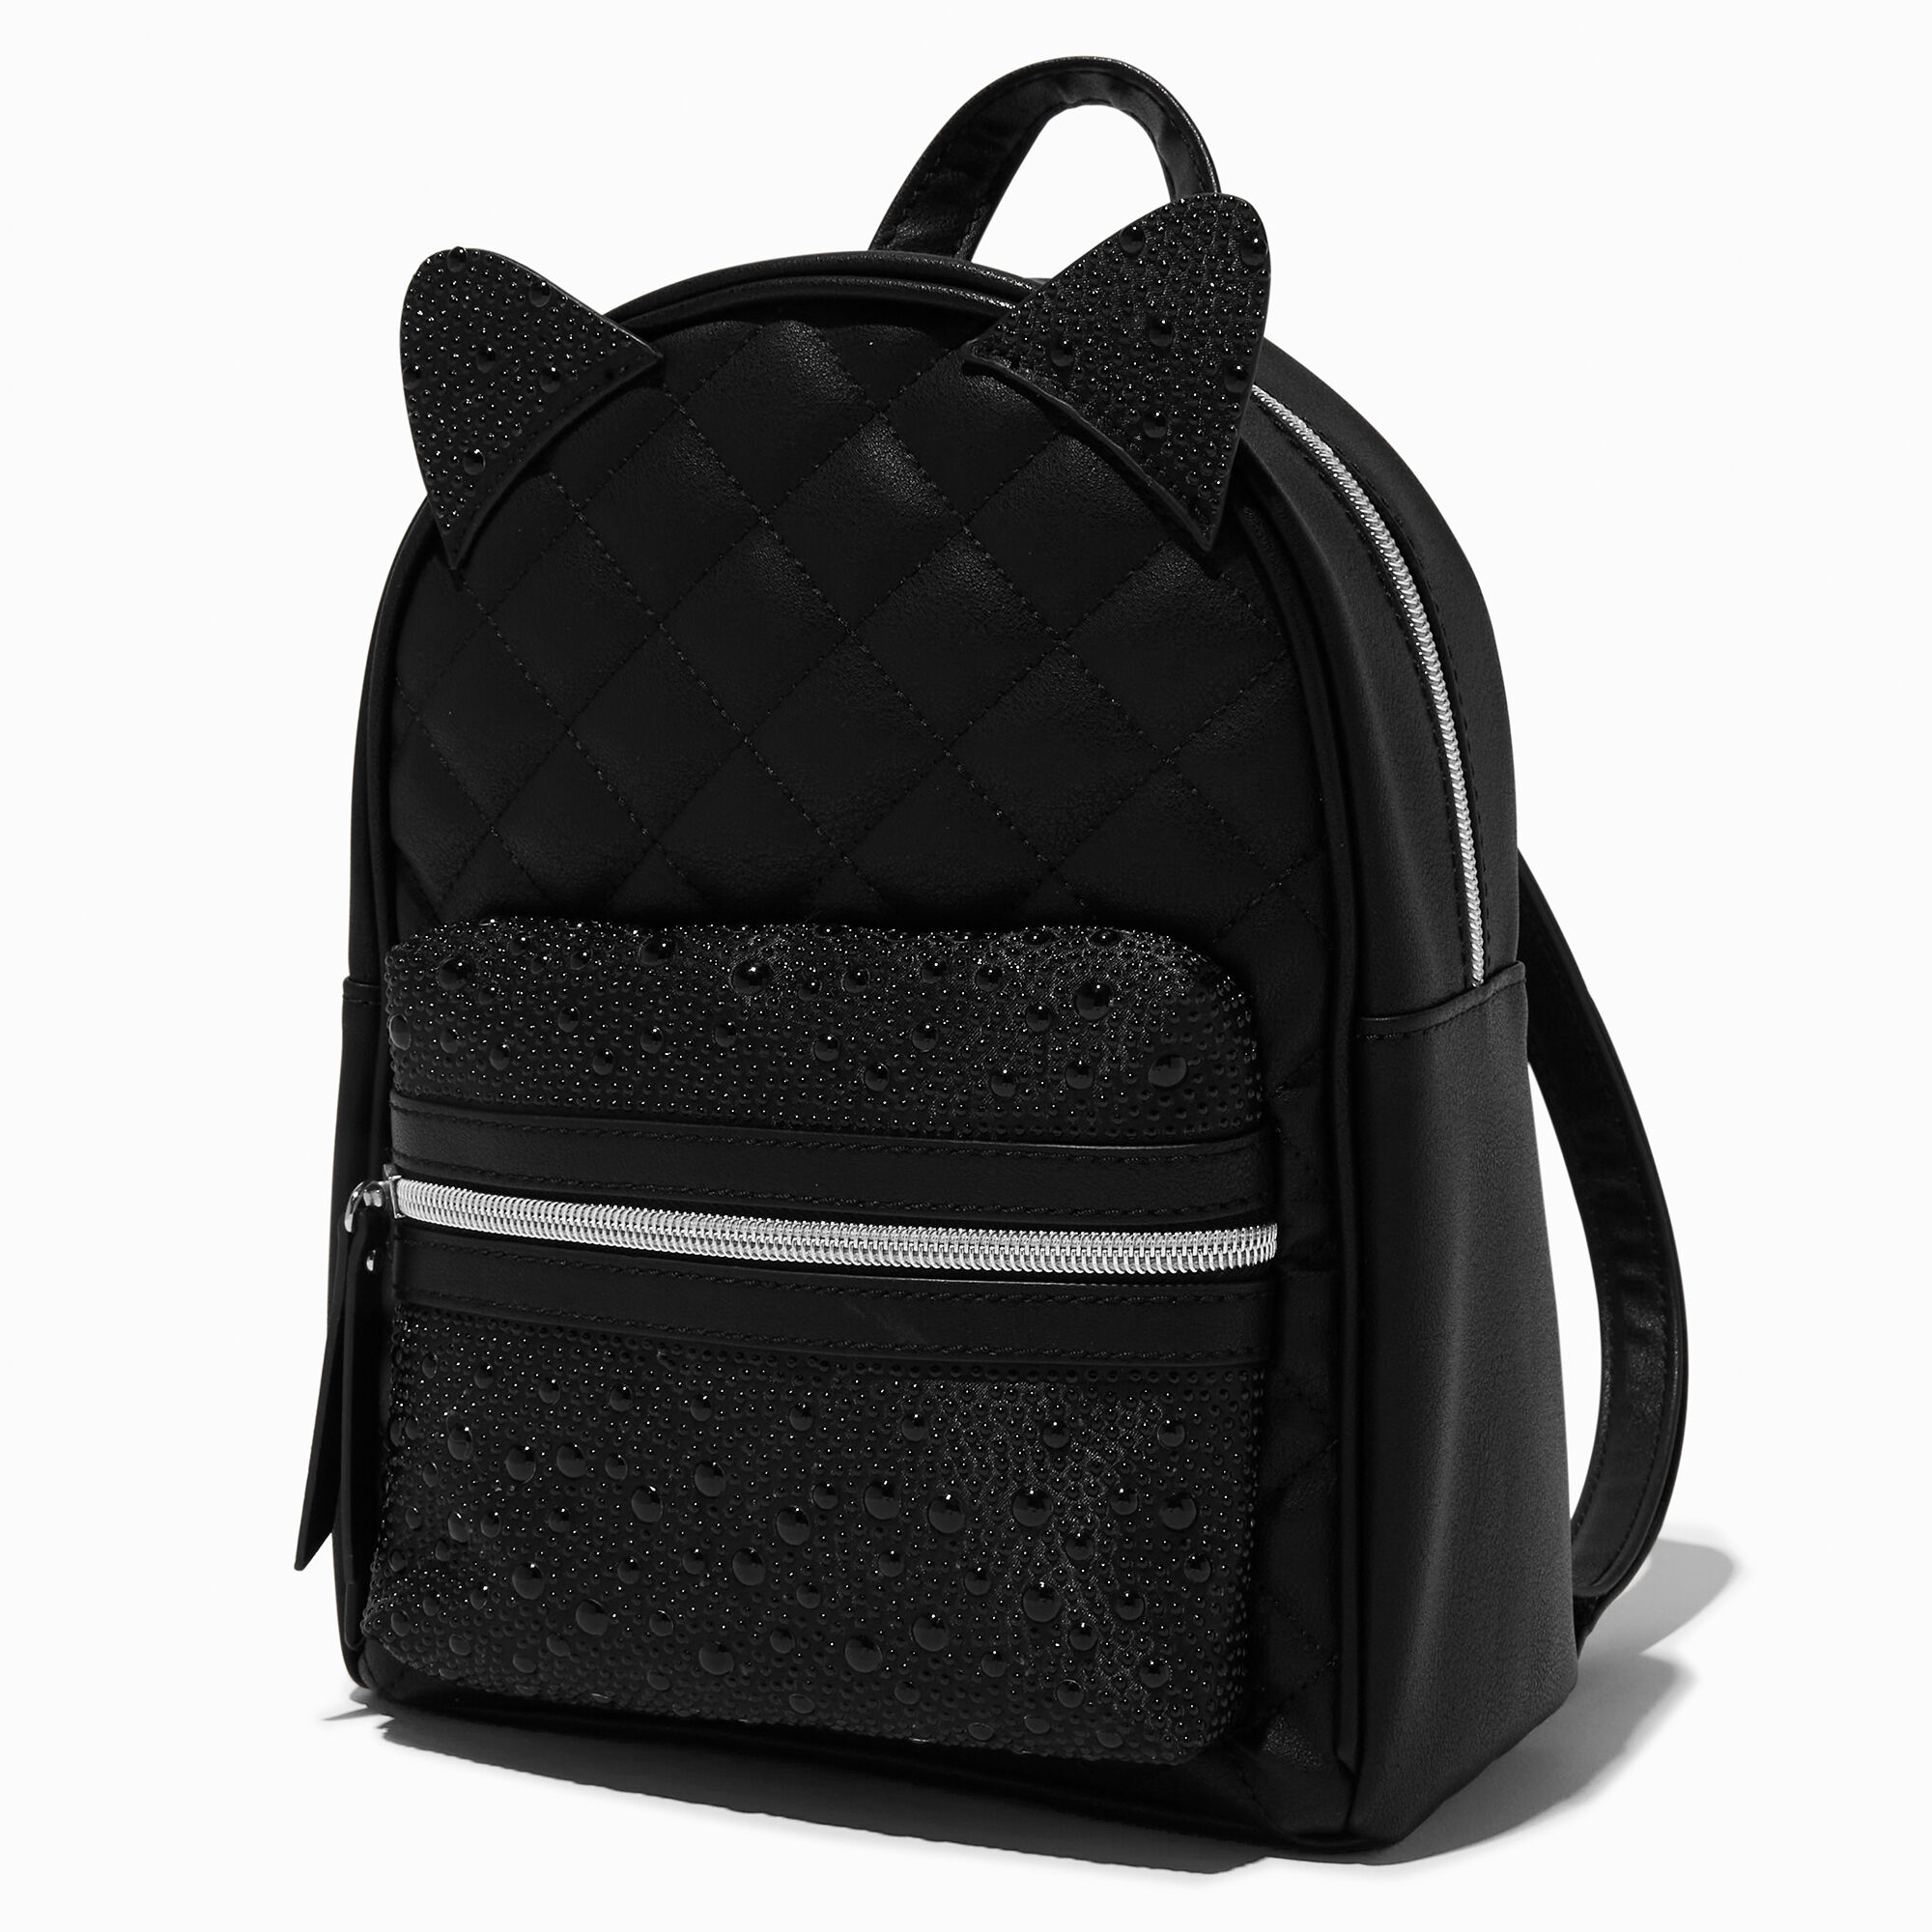 View Claires Cat Backpack Black information